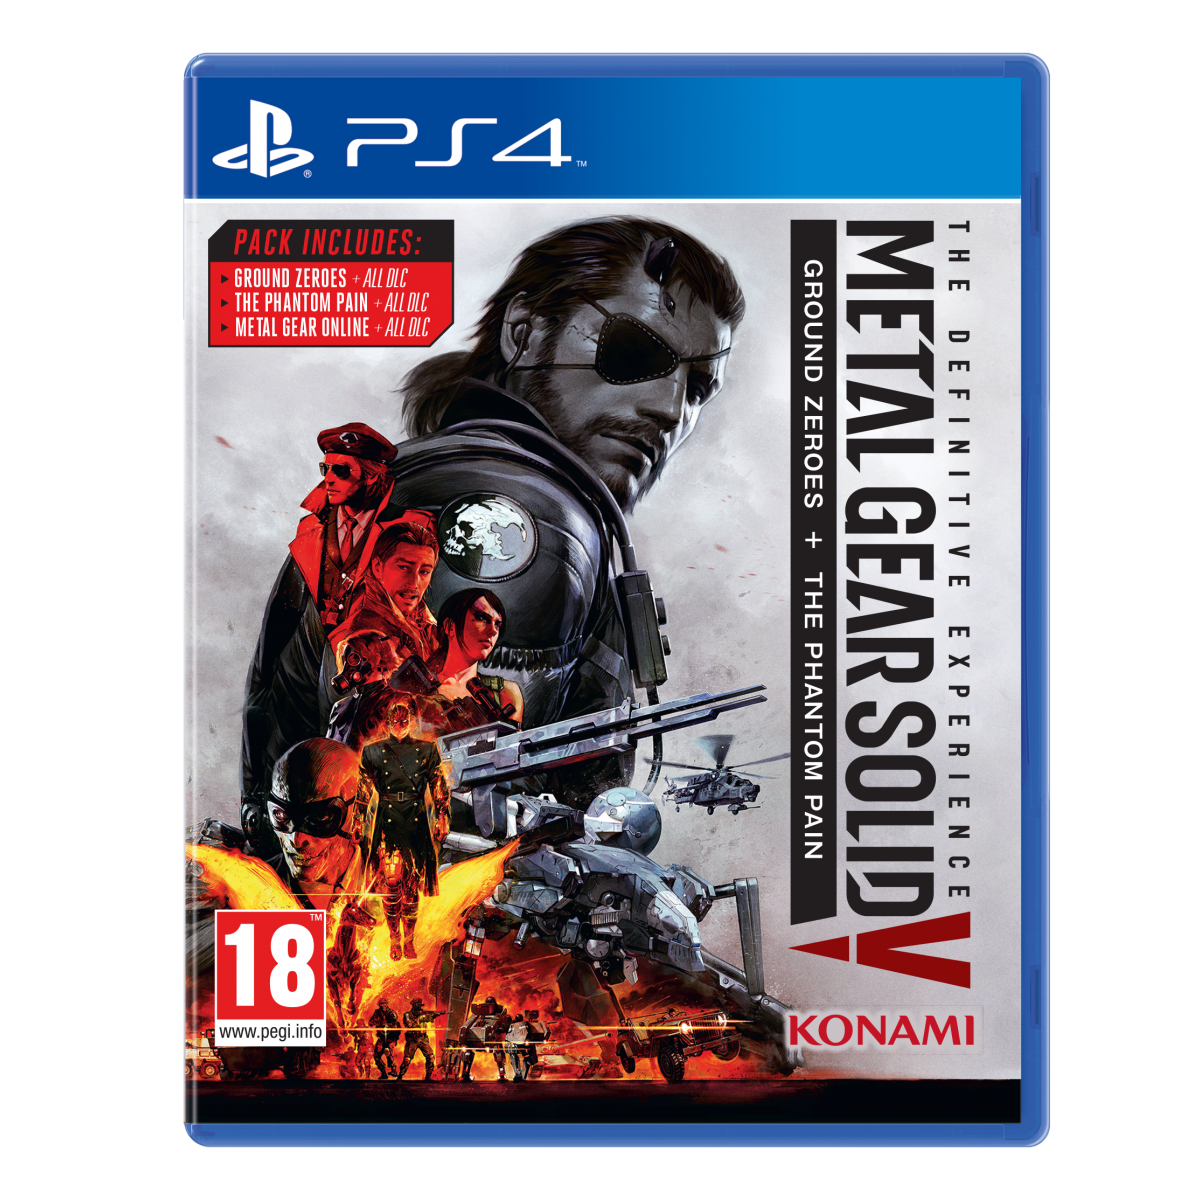 Metal Gear Solid V (5): The Definitive Experience Juego para PlayStation 4 PS4